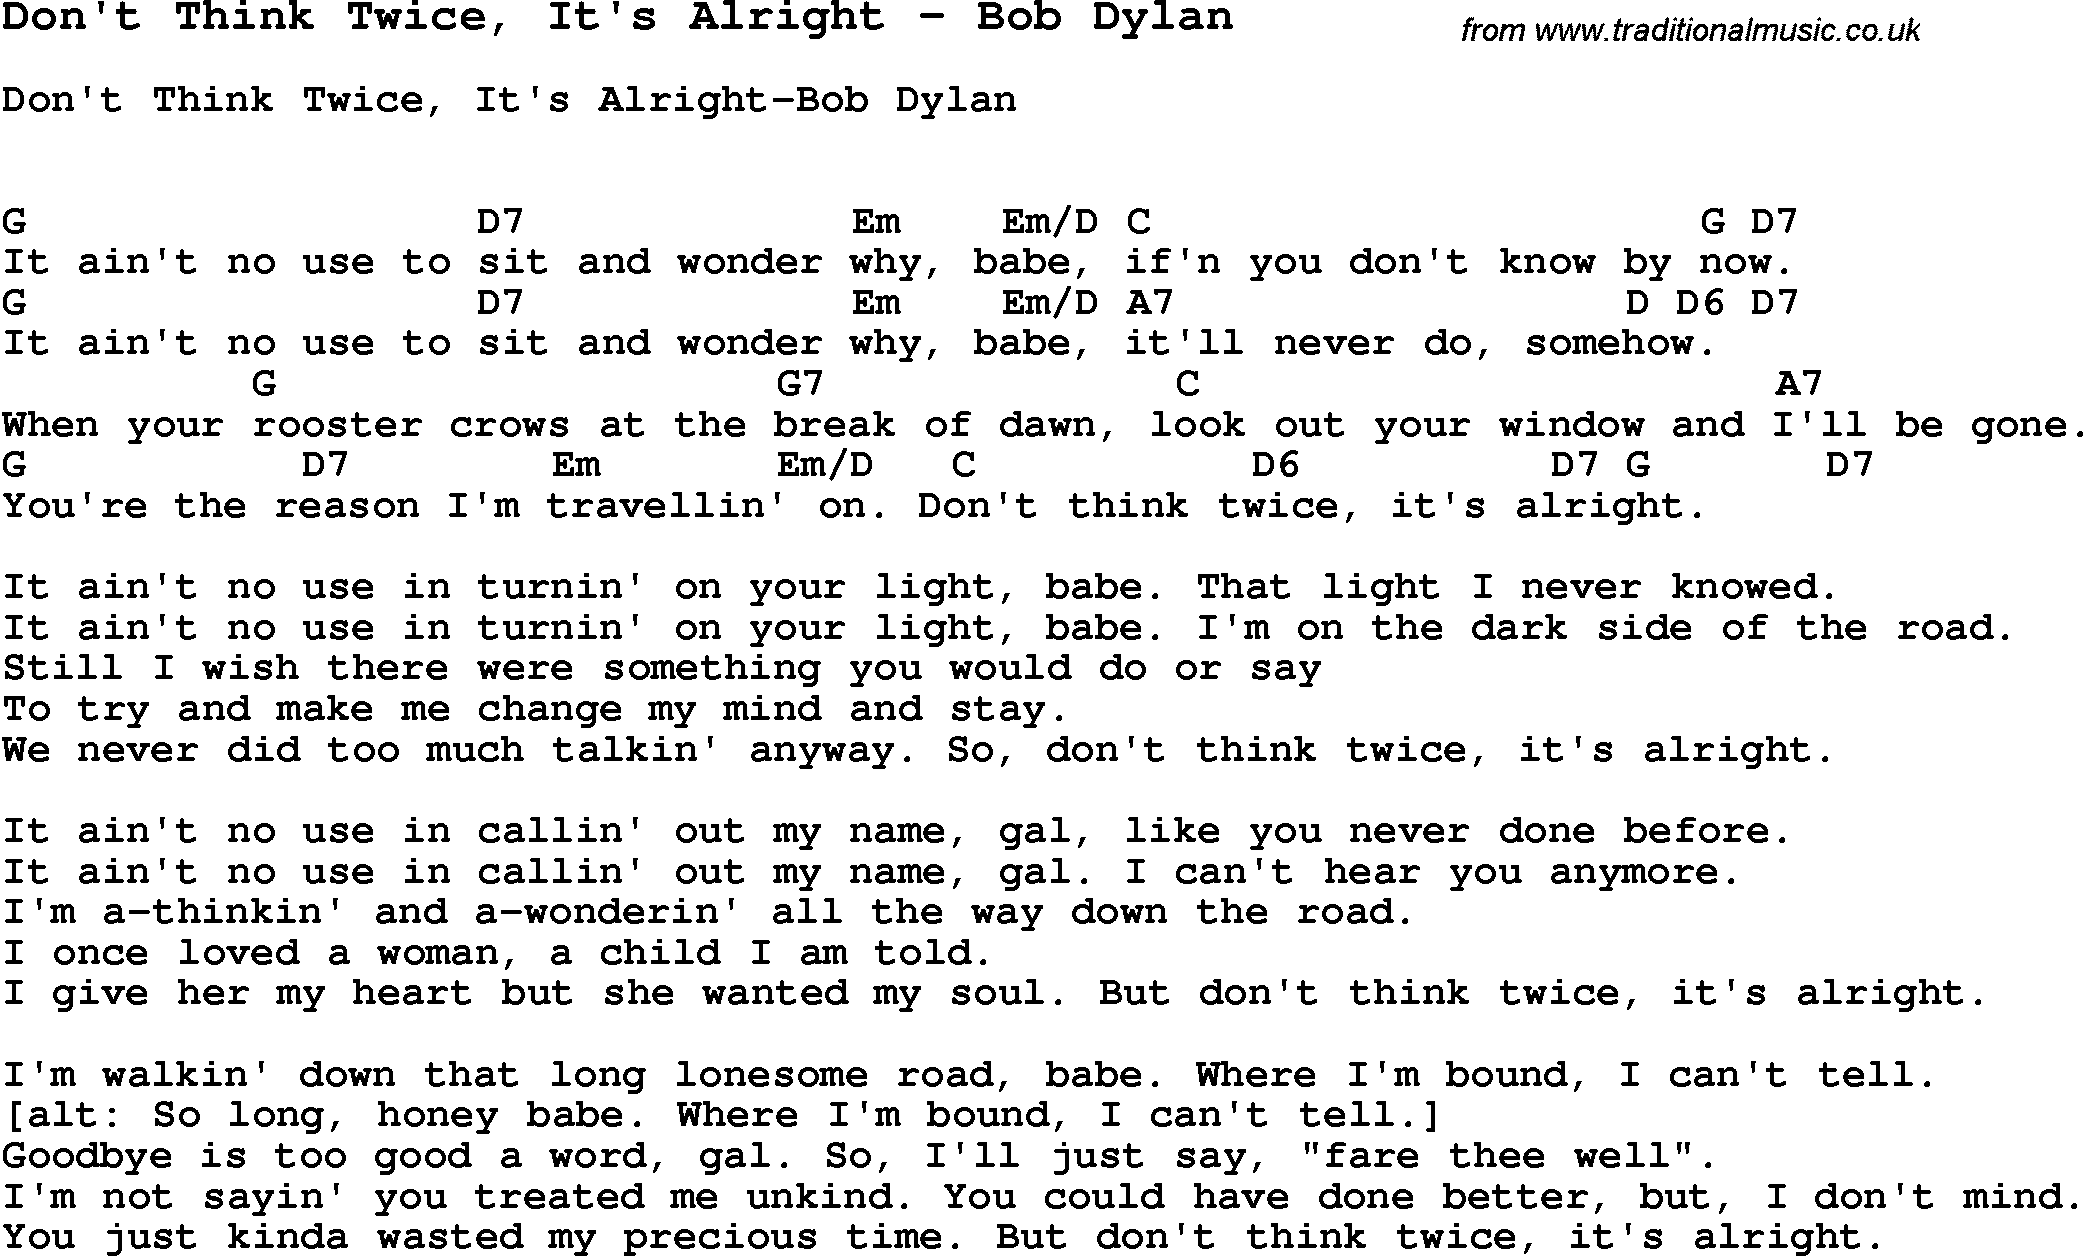 Song Don't Think Twice, It's Alright by Bob Dylan, with lyrics for vocal performance and accompaniment chords for Ukulele, Guitar Banjo etc.